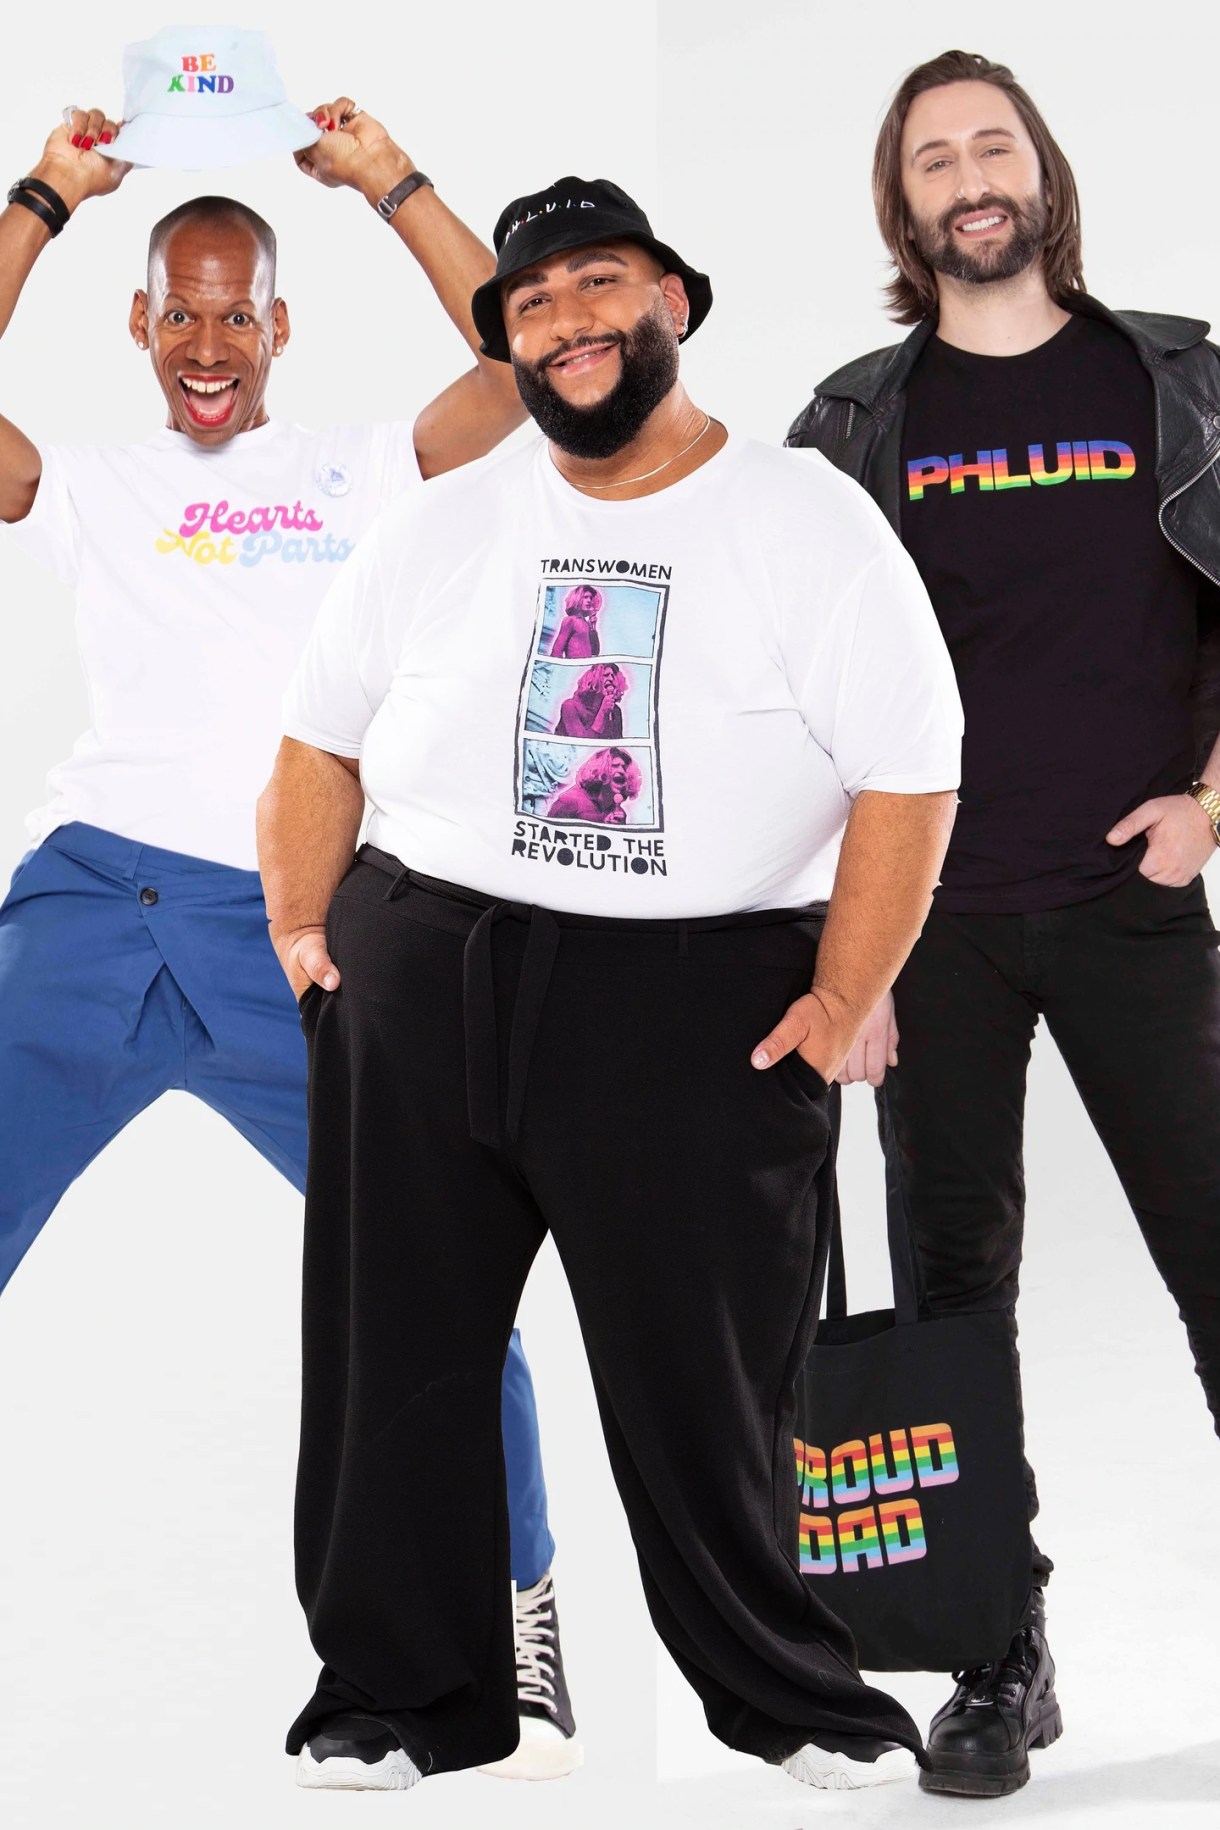 Three models in Phulid Project gear: hearts Not parts tee, "Trans Women Started the Revolution" and "PHLUID" in rainbow block lettering. The middle model is also holding a "PROUD DAD" tote bag.